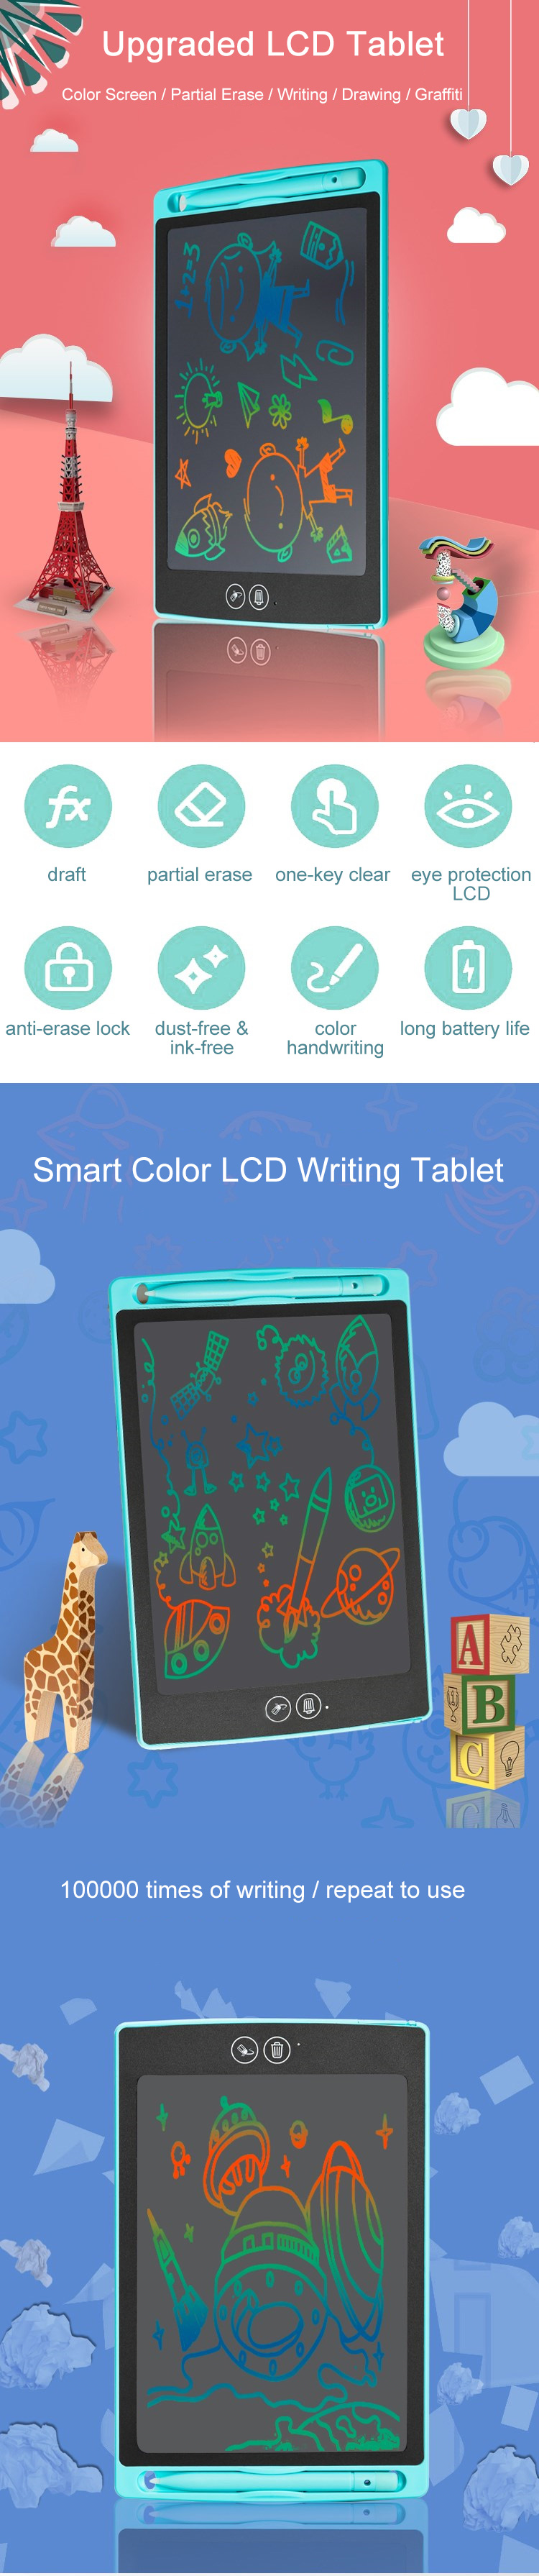 12-inch-Smart-Children-Color-Writing-Tablet-Electronic-Drawing-Writing-Board-Portable-Handwriting-No-1618988-1